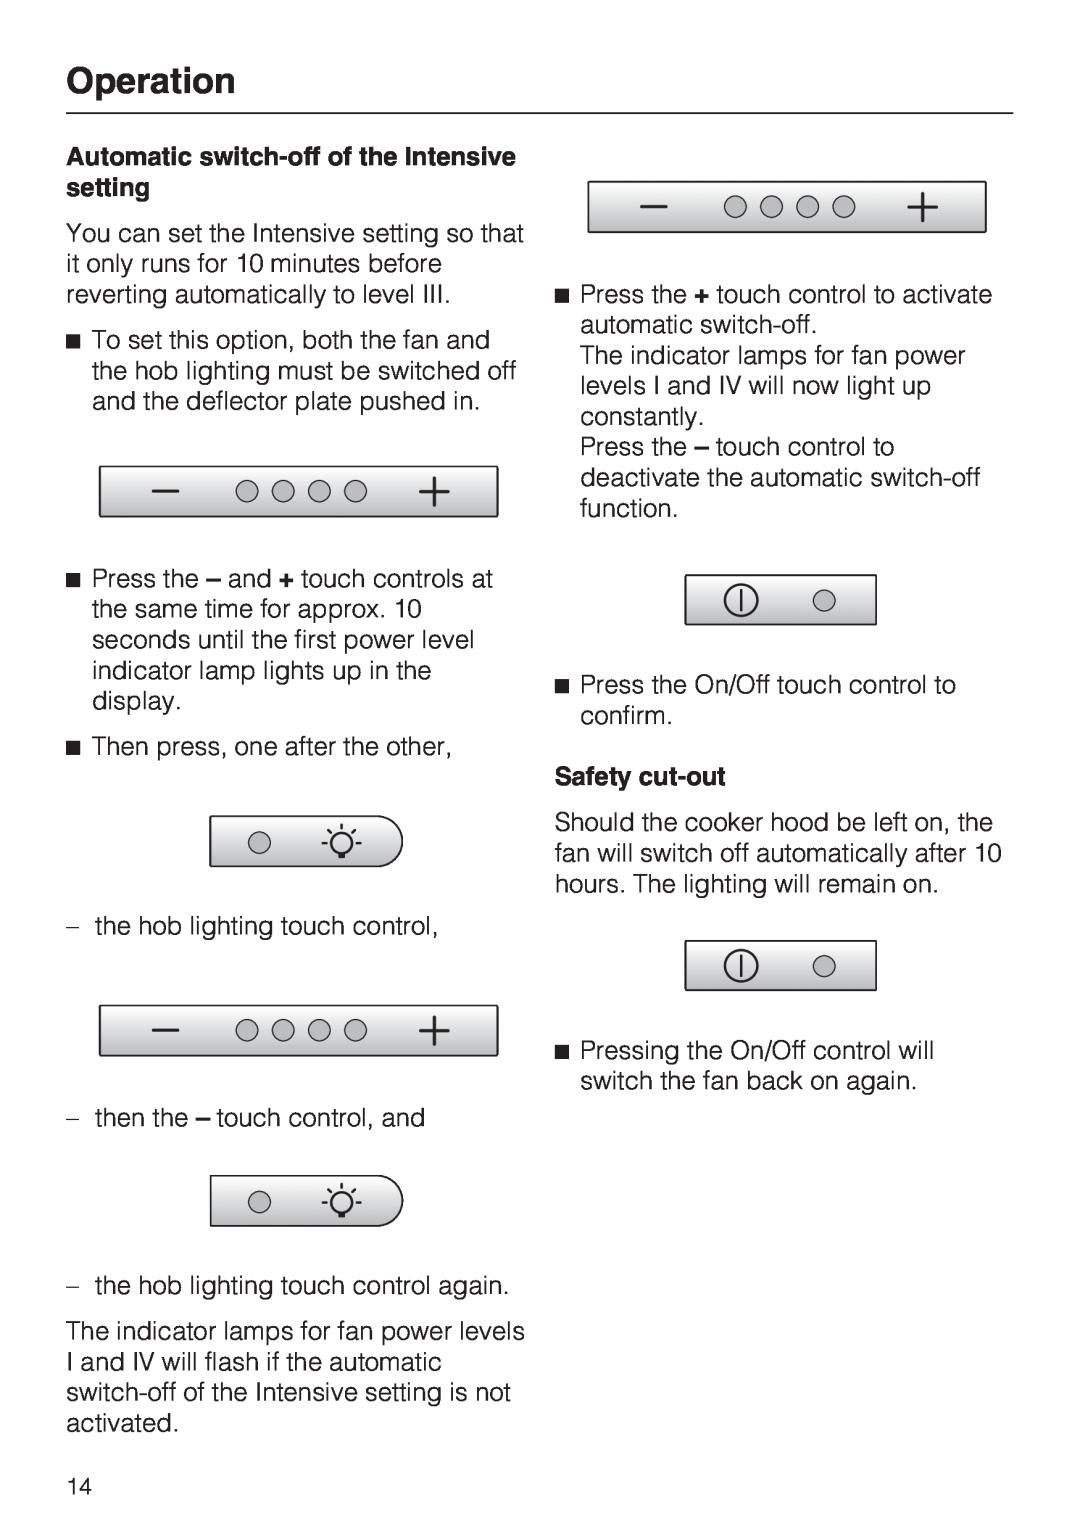 Miele DA 3190, DA 3160 installation instructions Automatic switch-offof the Intensive setting, Safety cut-out, Operation 